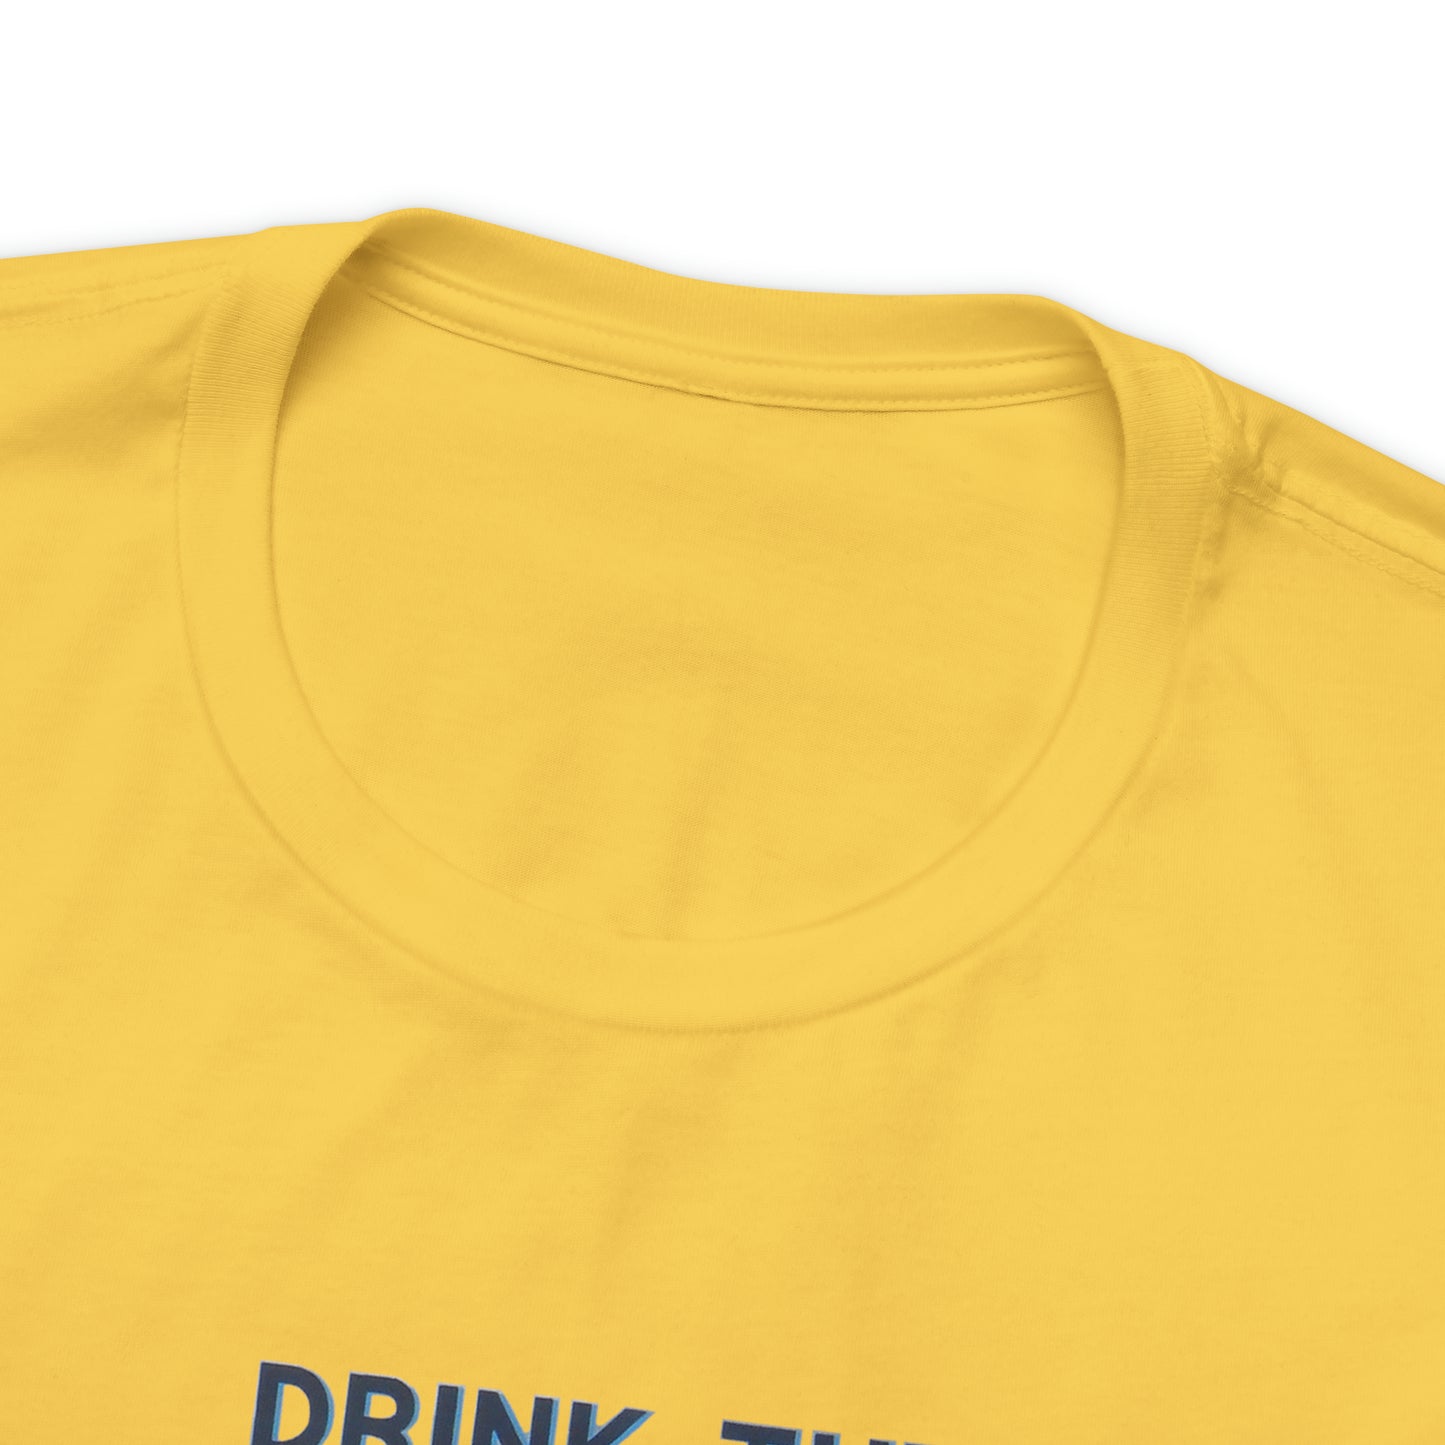 Drink the Coolaid Cotton Tee